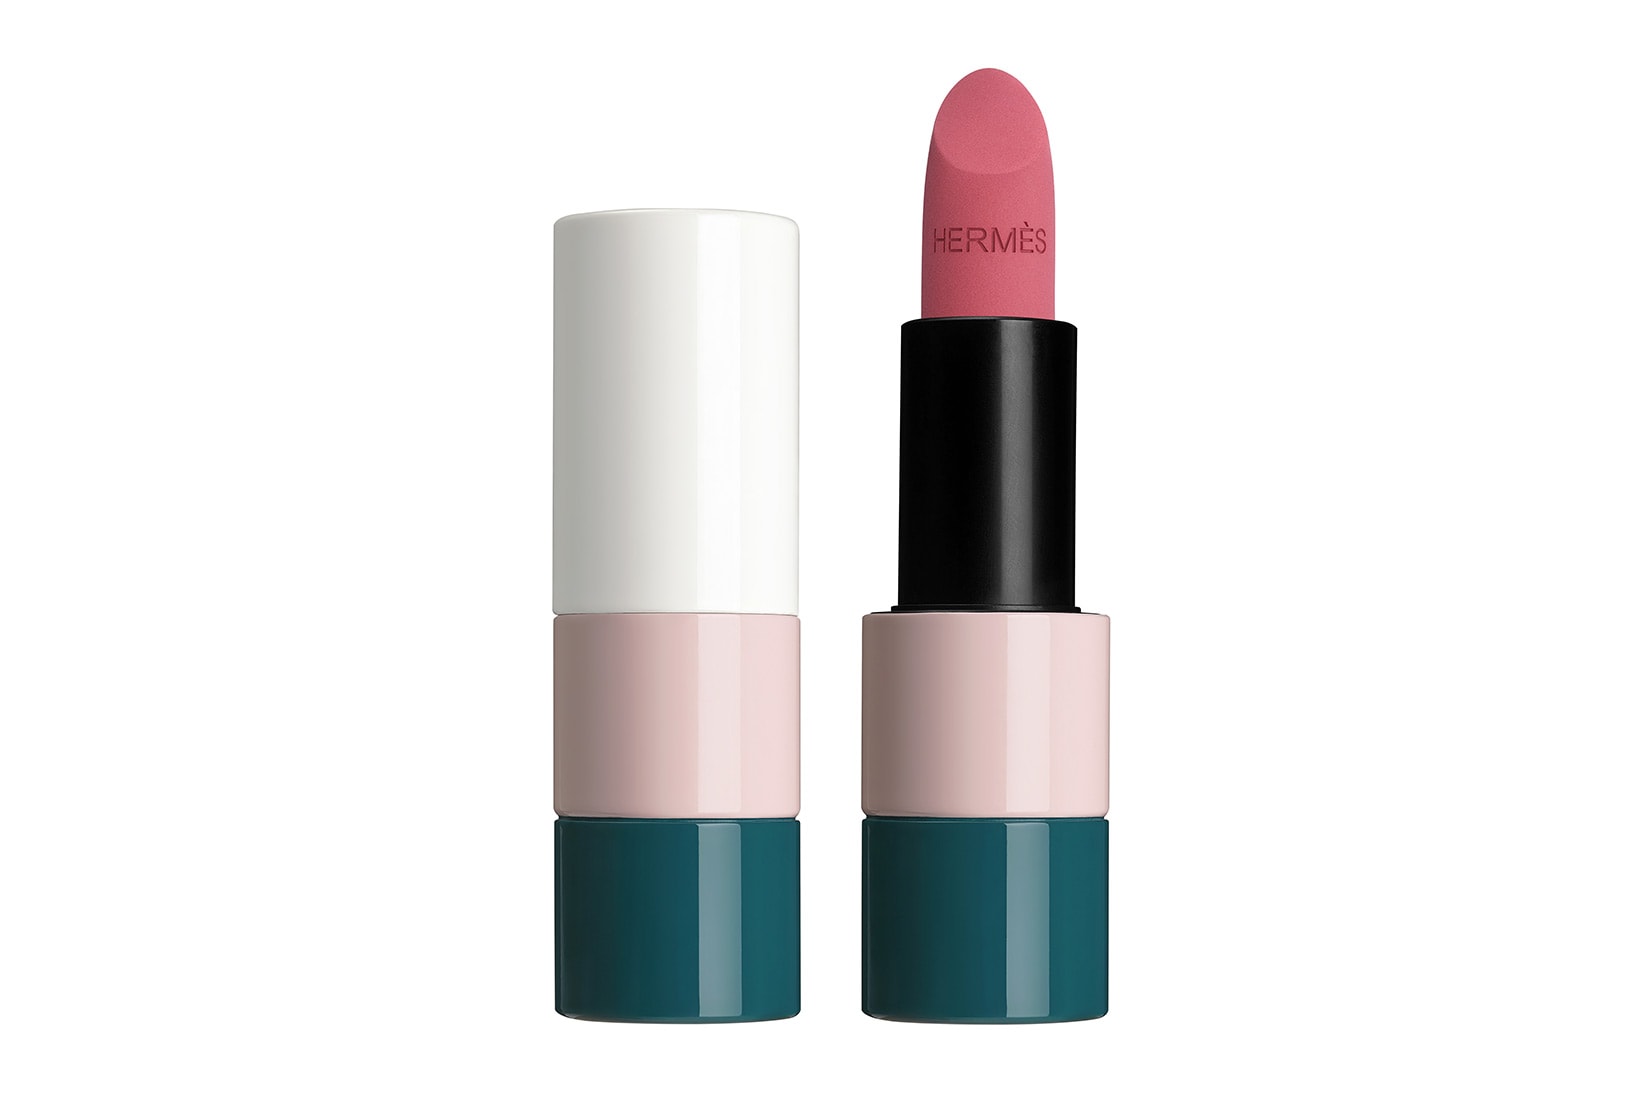 hermes beauty rouge lipsticks new shades satin matte fall winter collection rose ombre pommette nuit 